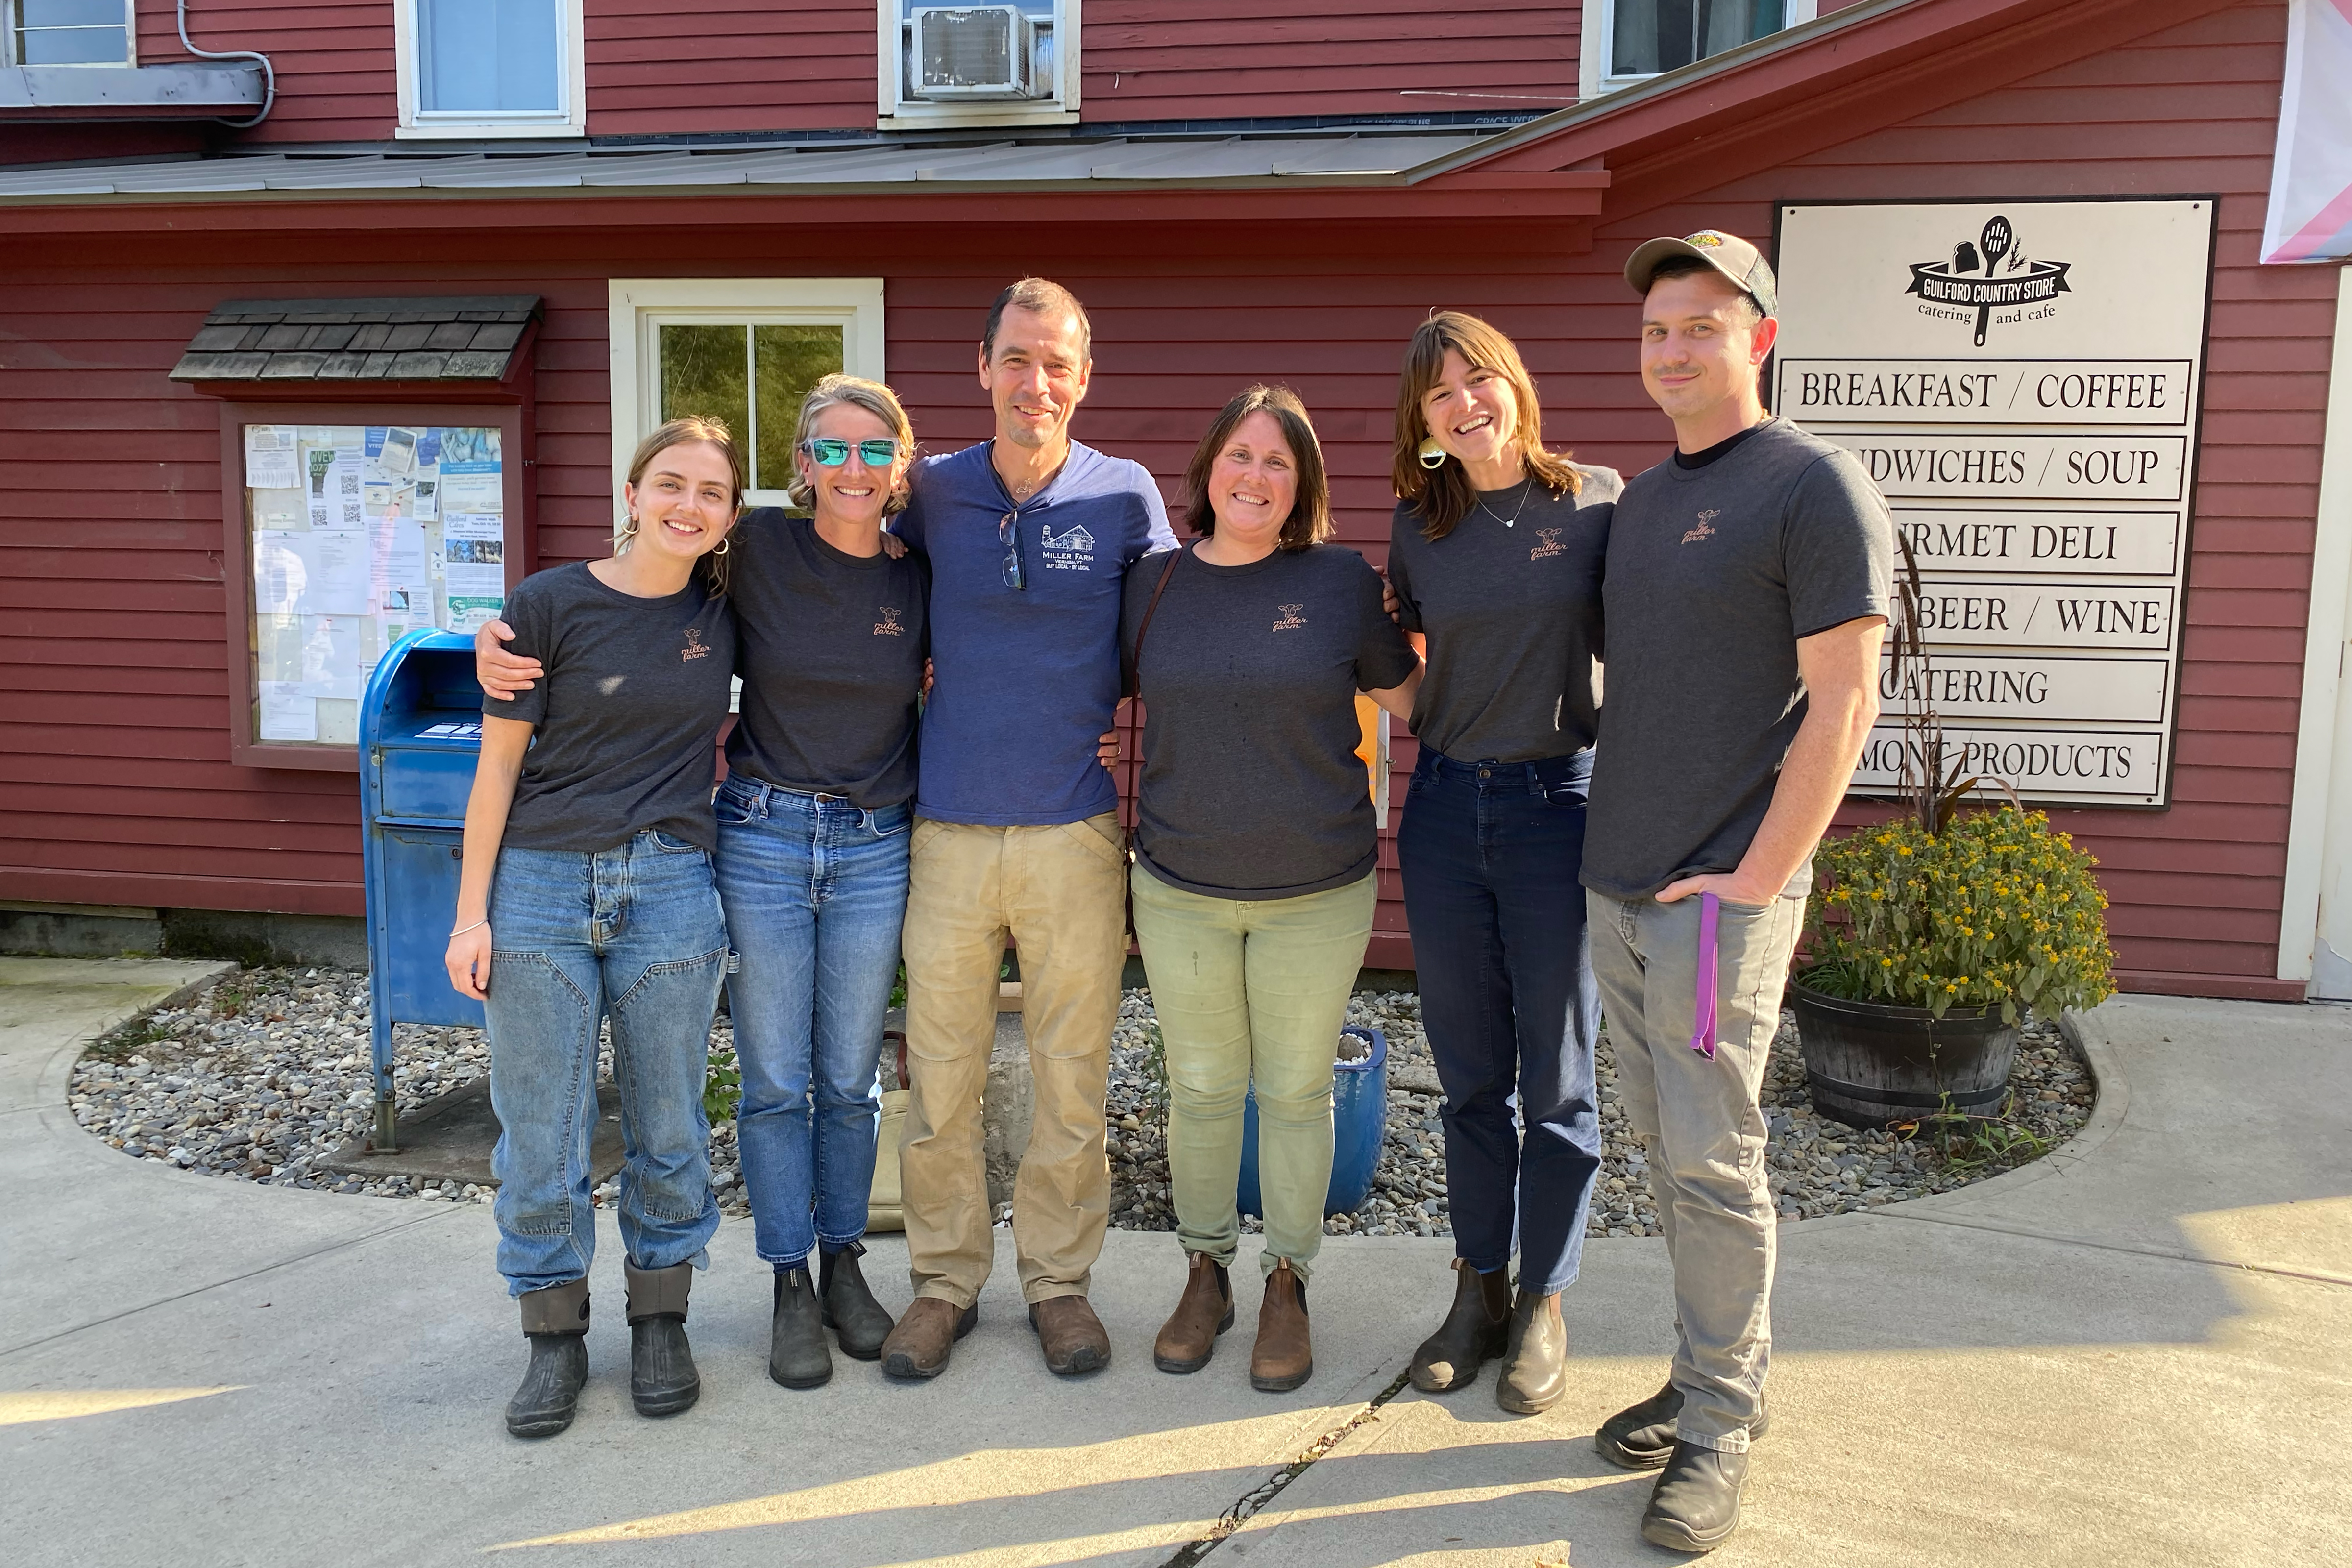 NOFA-VT staff members involved in the Miller Farm School Milk Pilot project are pictured with farmer Peter Miller, Olga Moriarty, Northeast Organic Family Farm Partnership Executive Director, and Harley Sterling, Director of School Nutrition for Windham Northeast Supervisory Union.